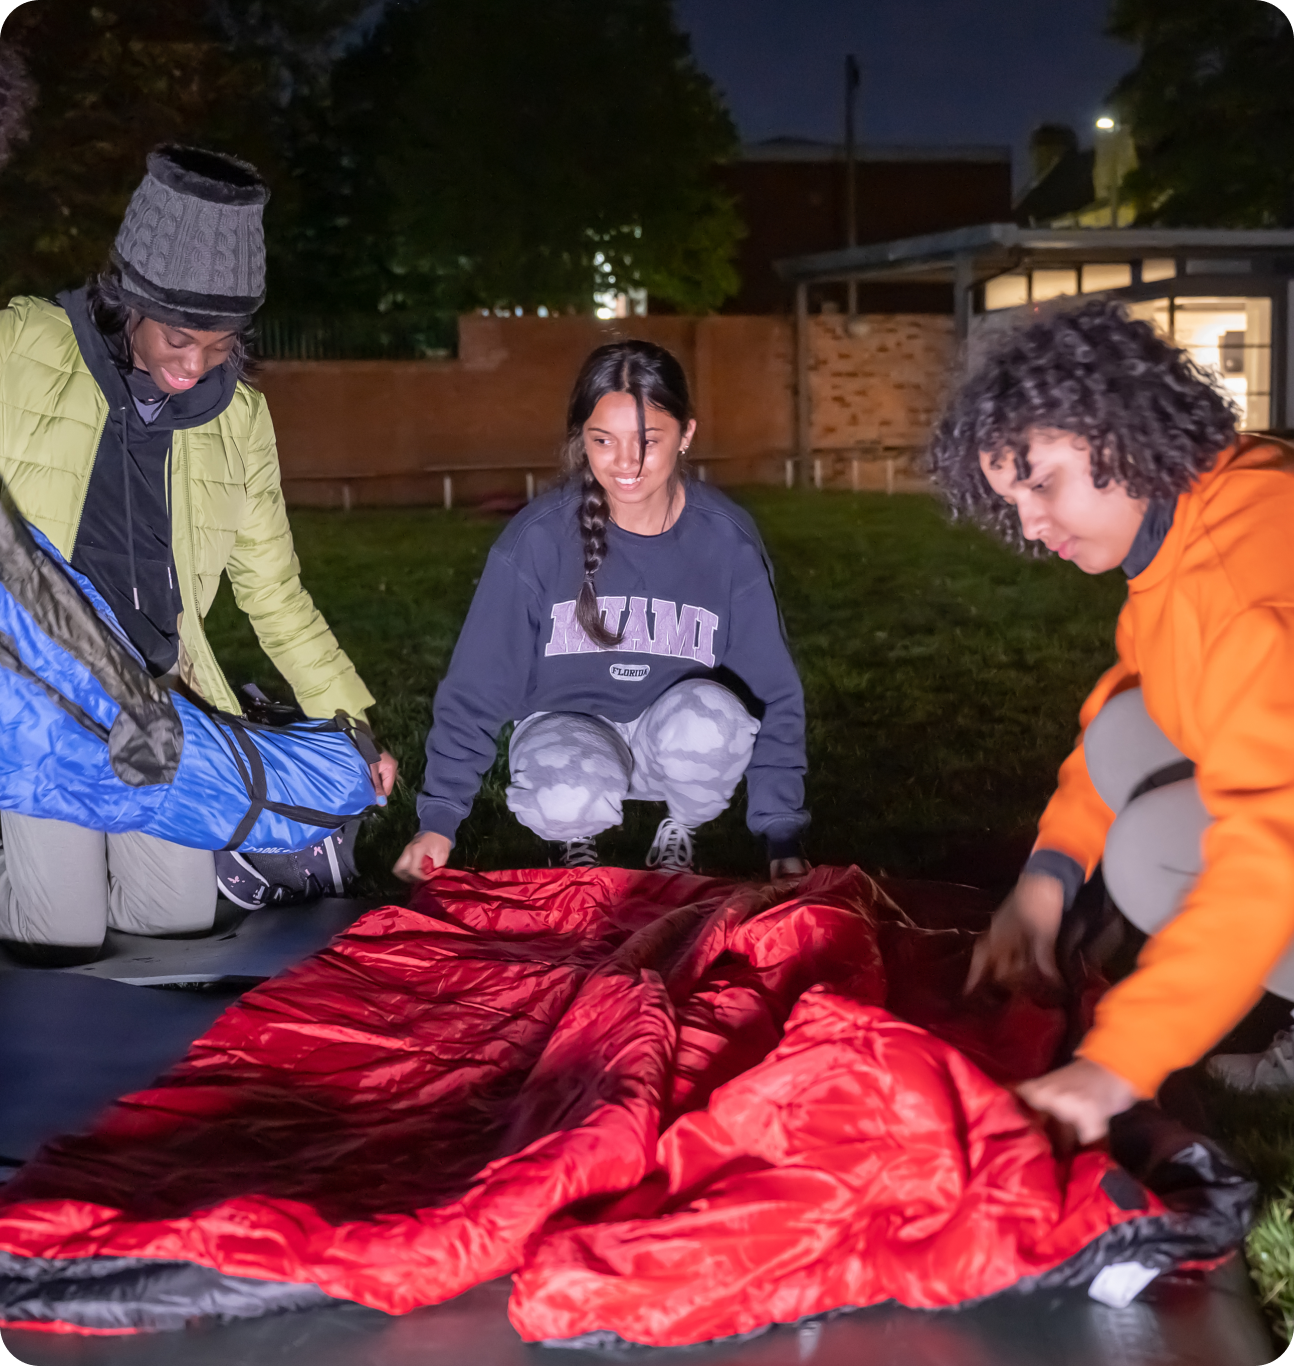 Four people laying out a red sleeping bag on the ground for the big sleep out